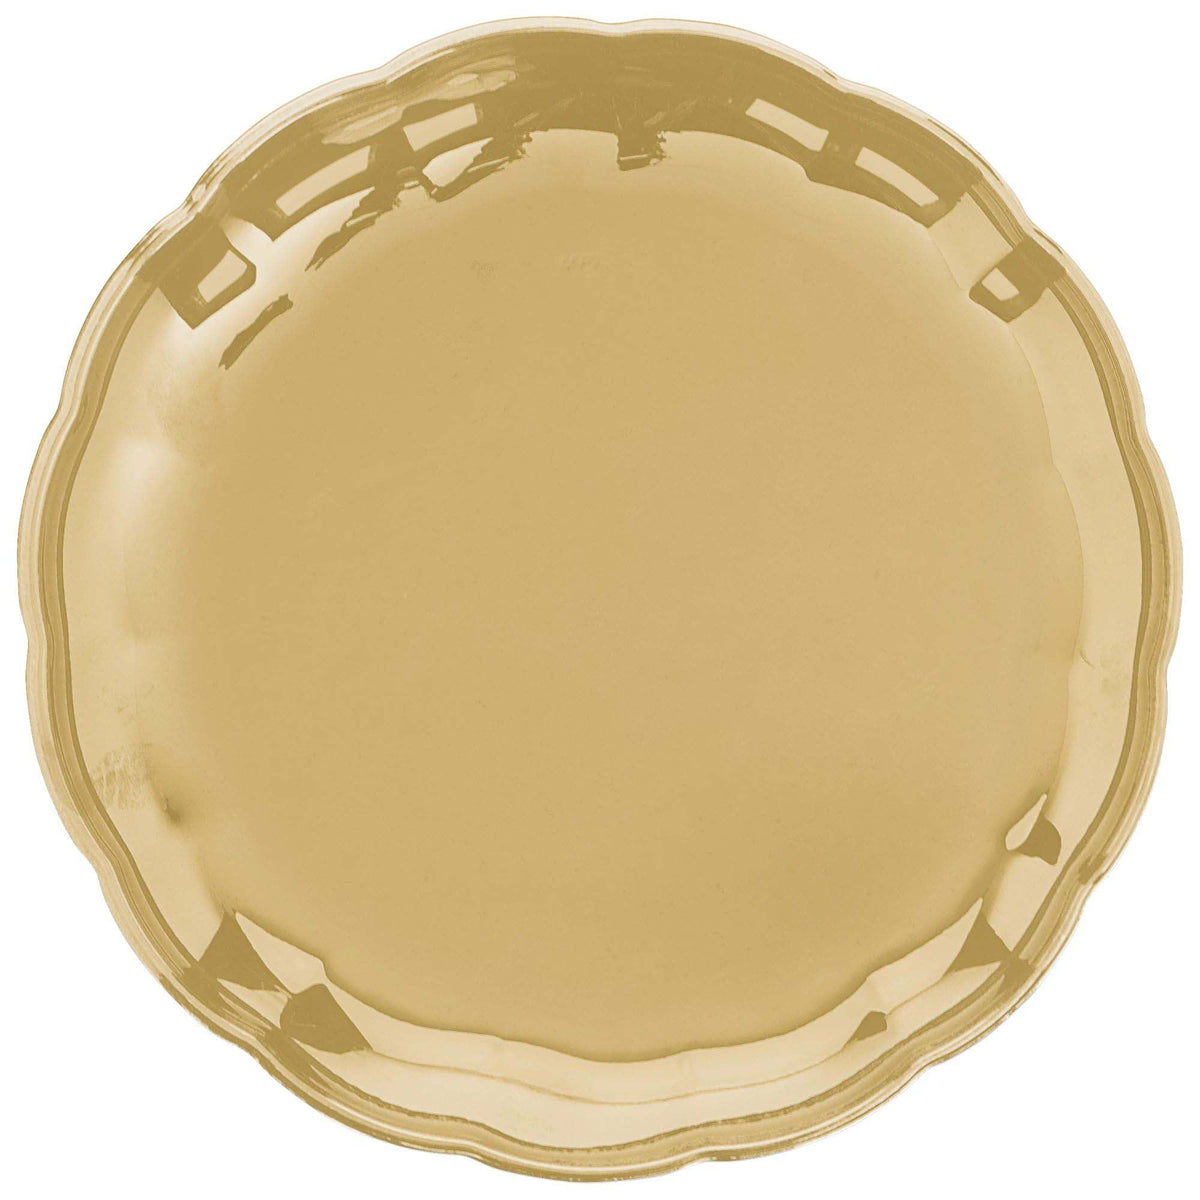 AMSCAN CA Disposable-Plasticware Large Round Scalloped Tray, Gold, 12 Inches, 1 Count